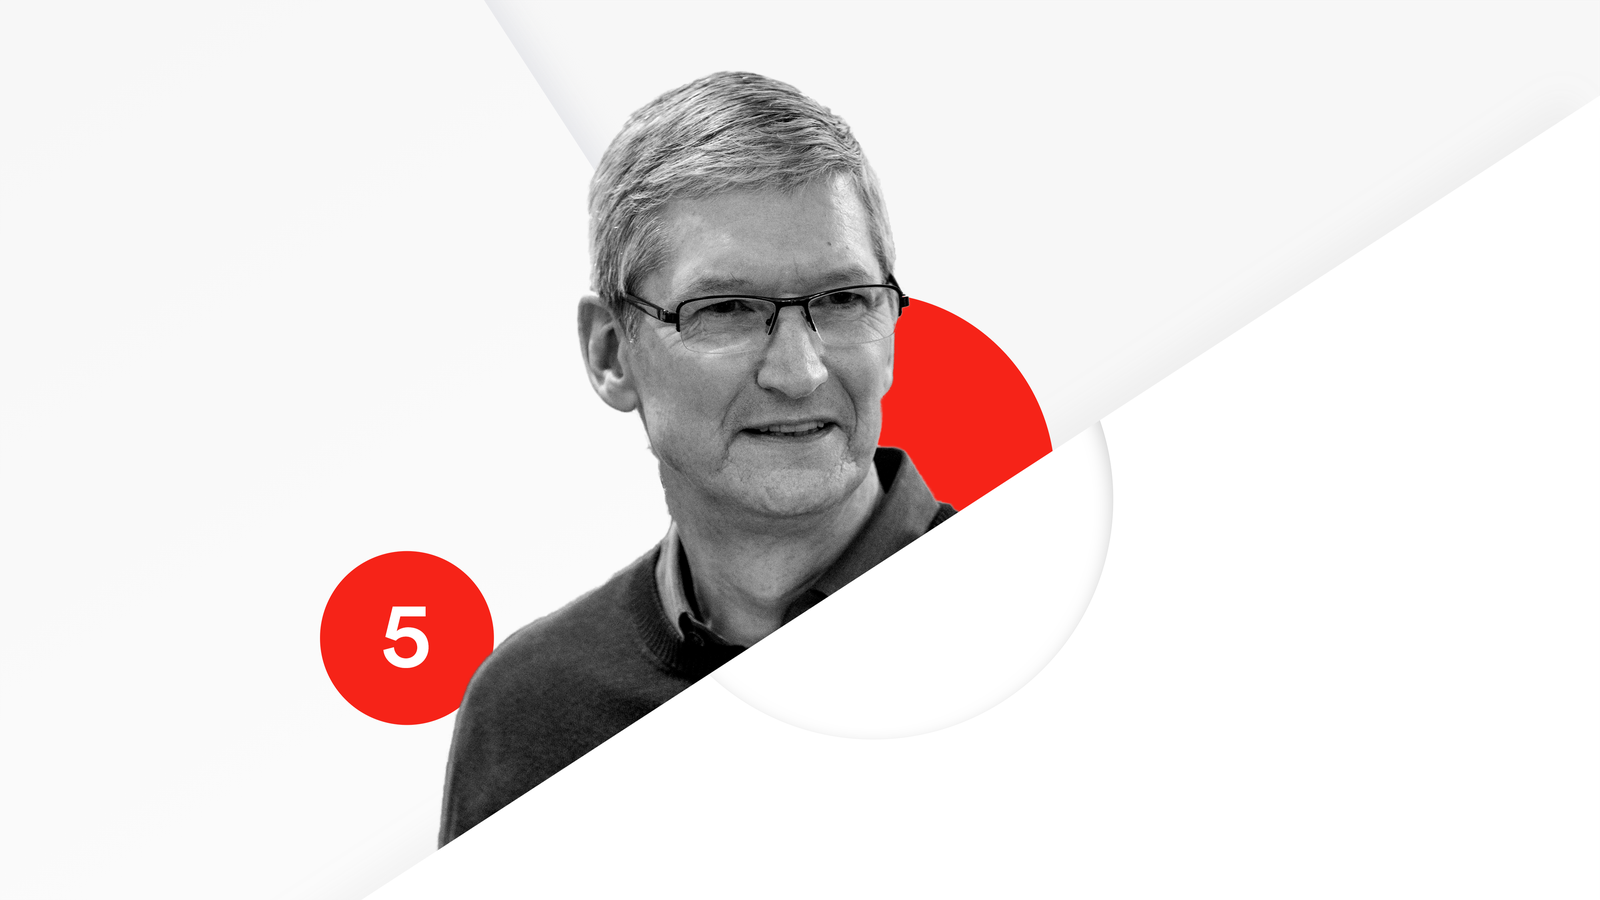 Apple's Tim Cook is officially underrated